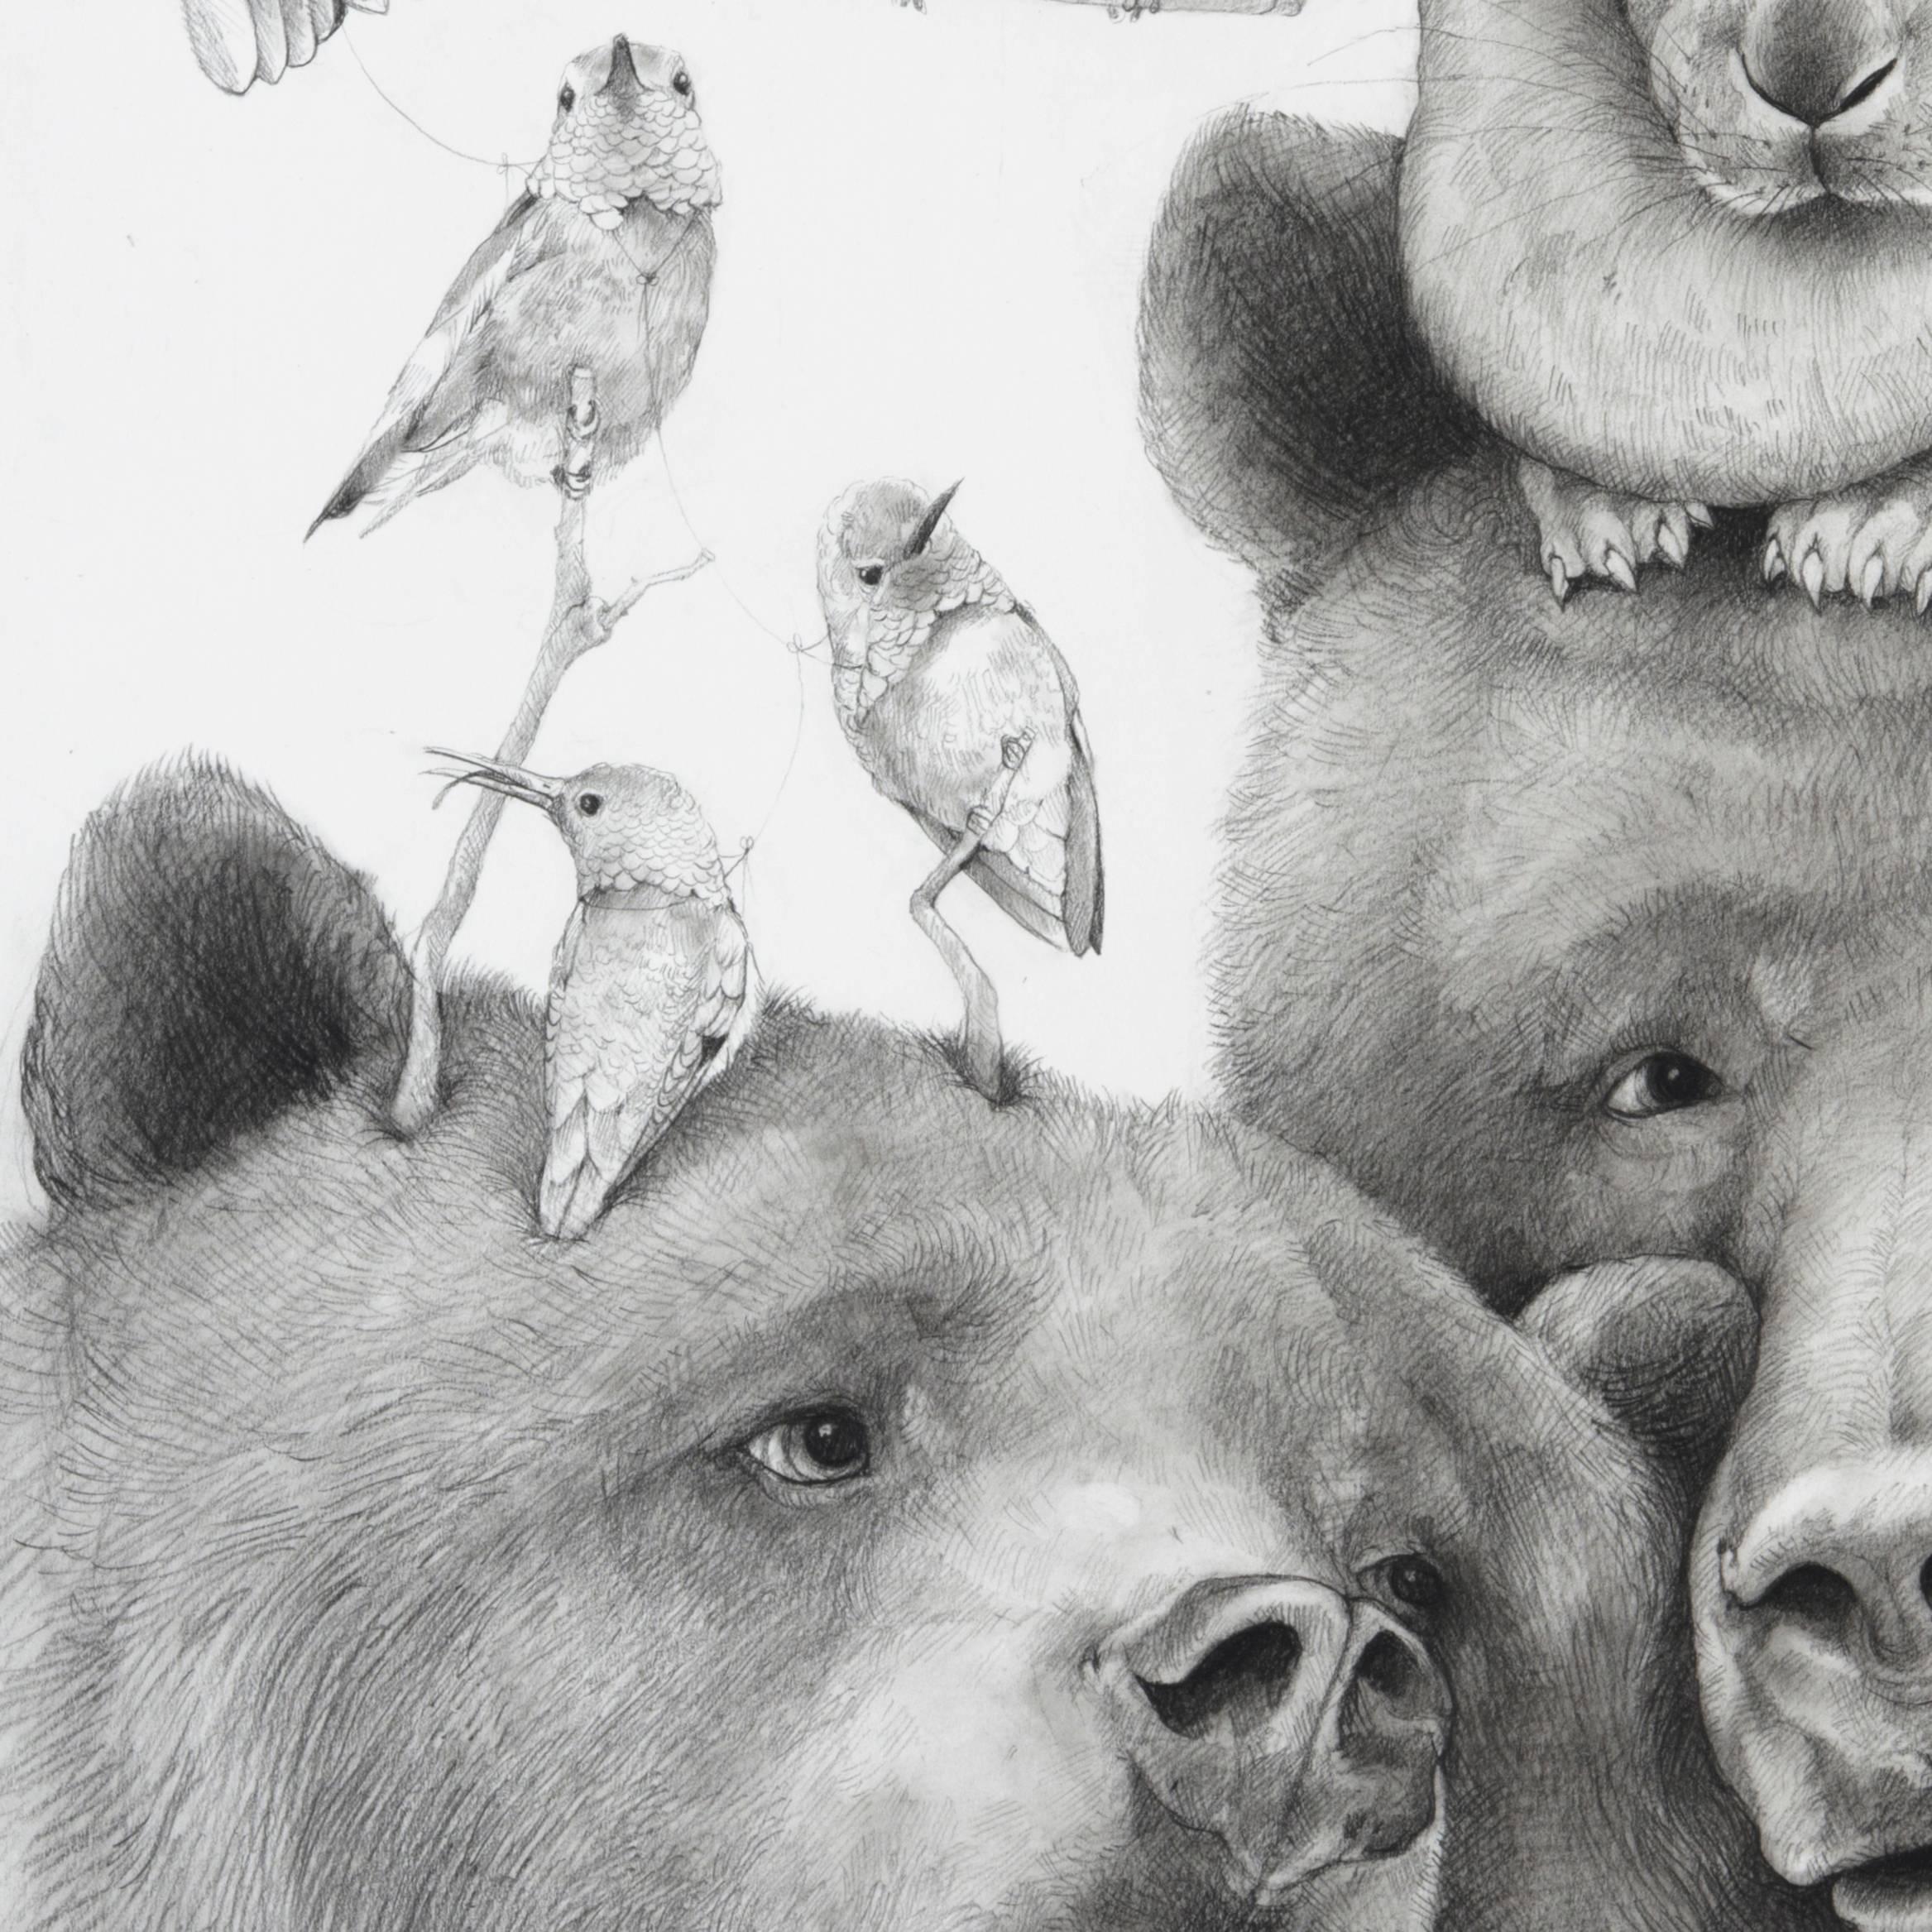 Momma Bear, carbon pencil portrait of bears with birds and bunny  - Art by Adonna Khare